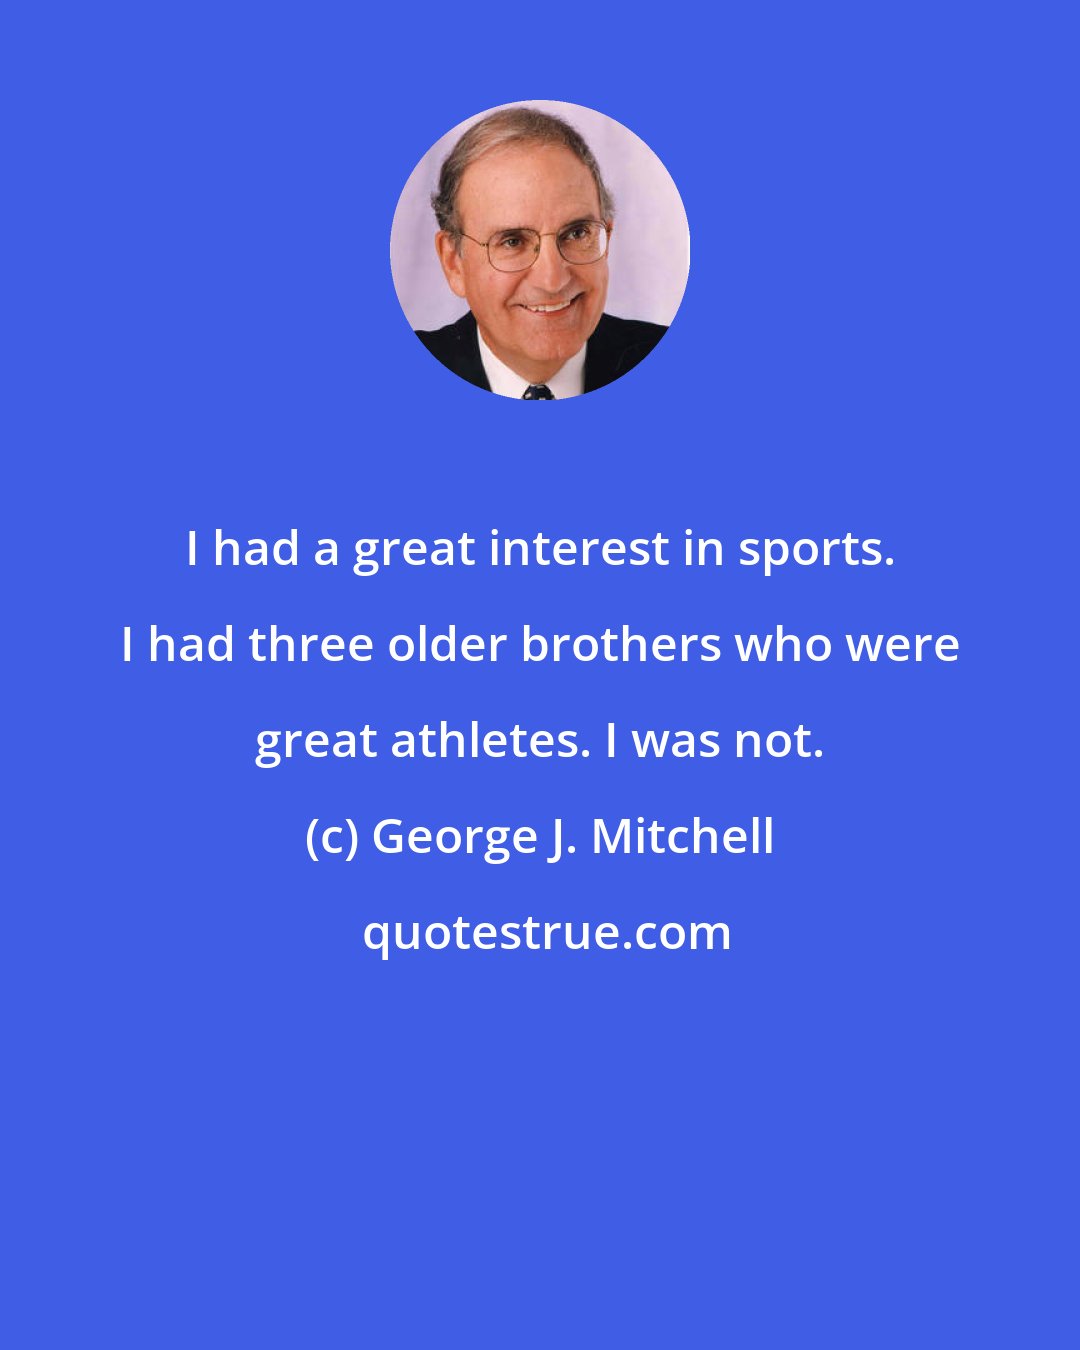 George J. Mitchell: I had a great interest in sports. I had three older brothers who were great athletes. I was not.